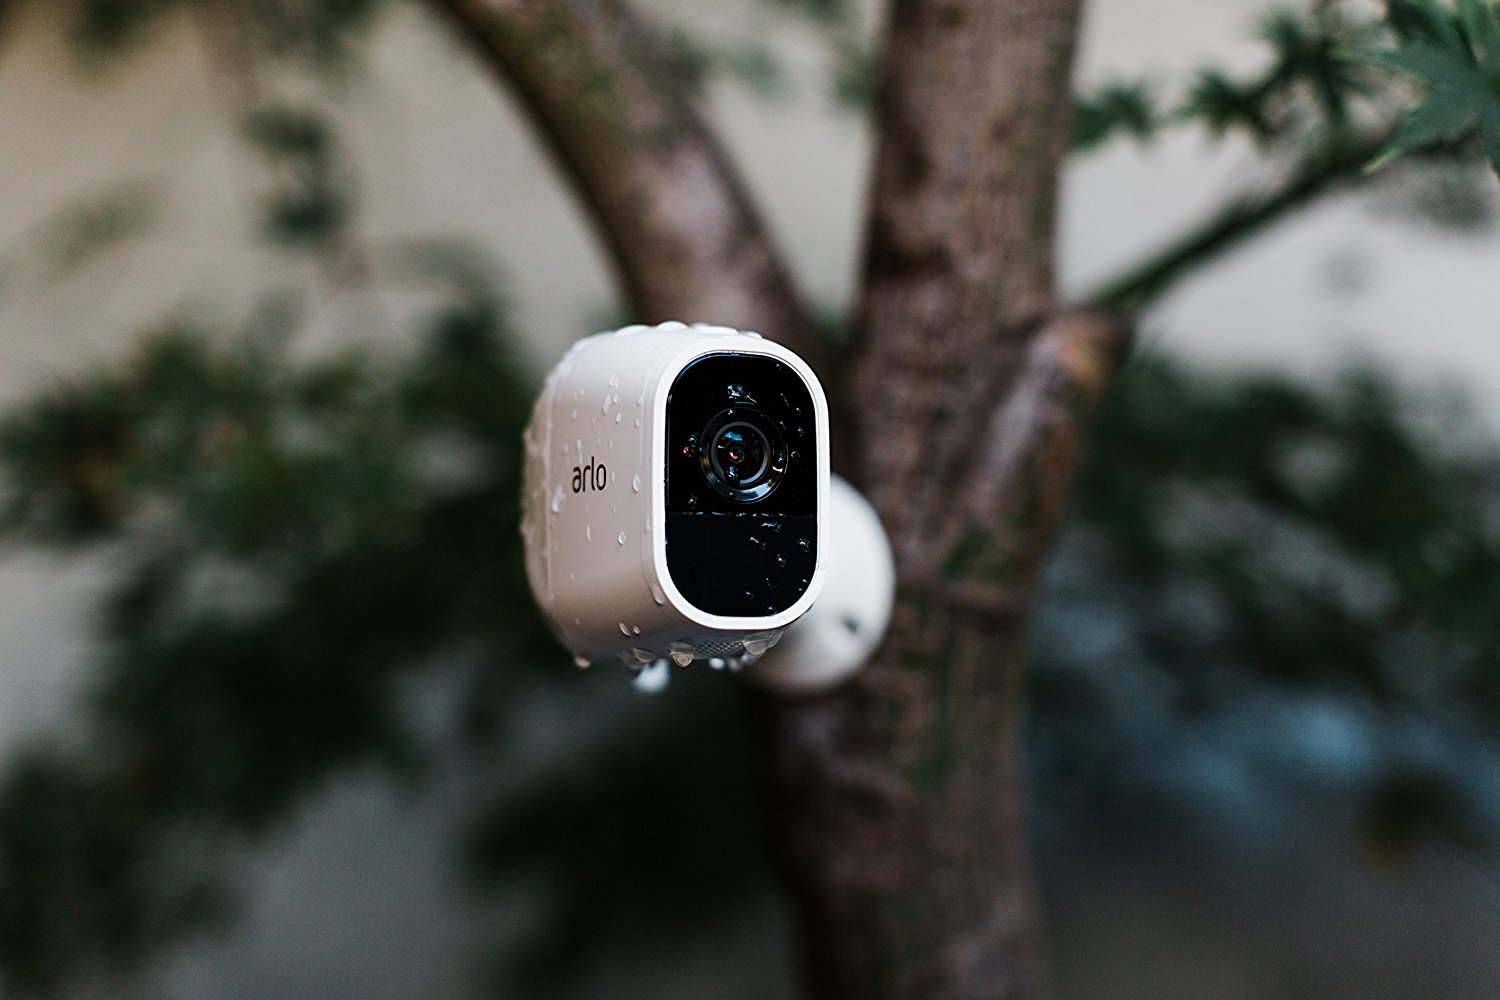 arlo pro 2 connect to wifi